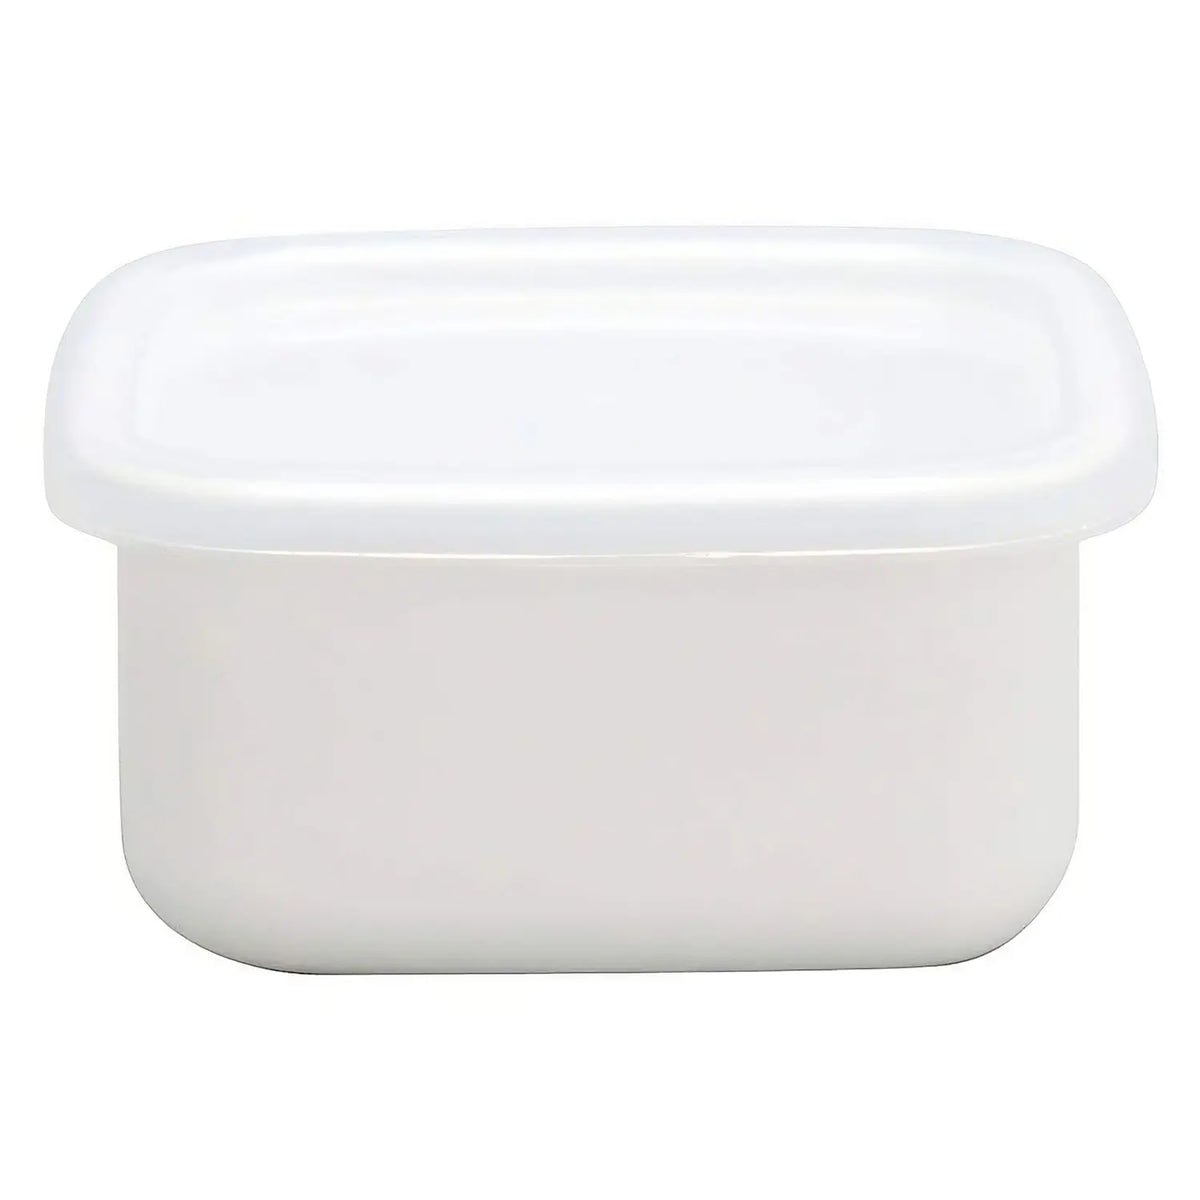 Noda Horo White Series Enamel Square Food Containers with Lid -  Globalkitchen Japan